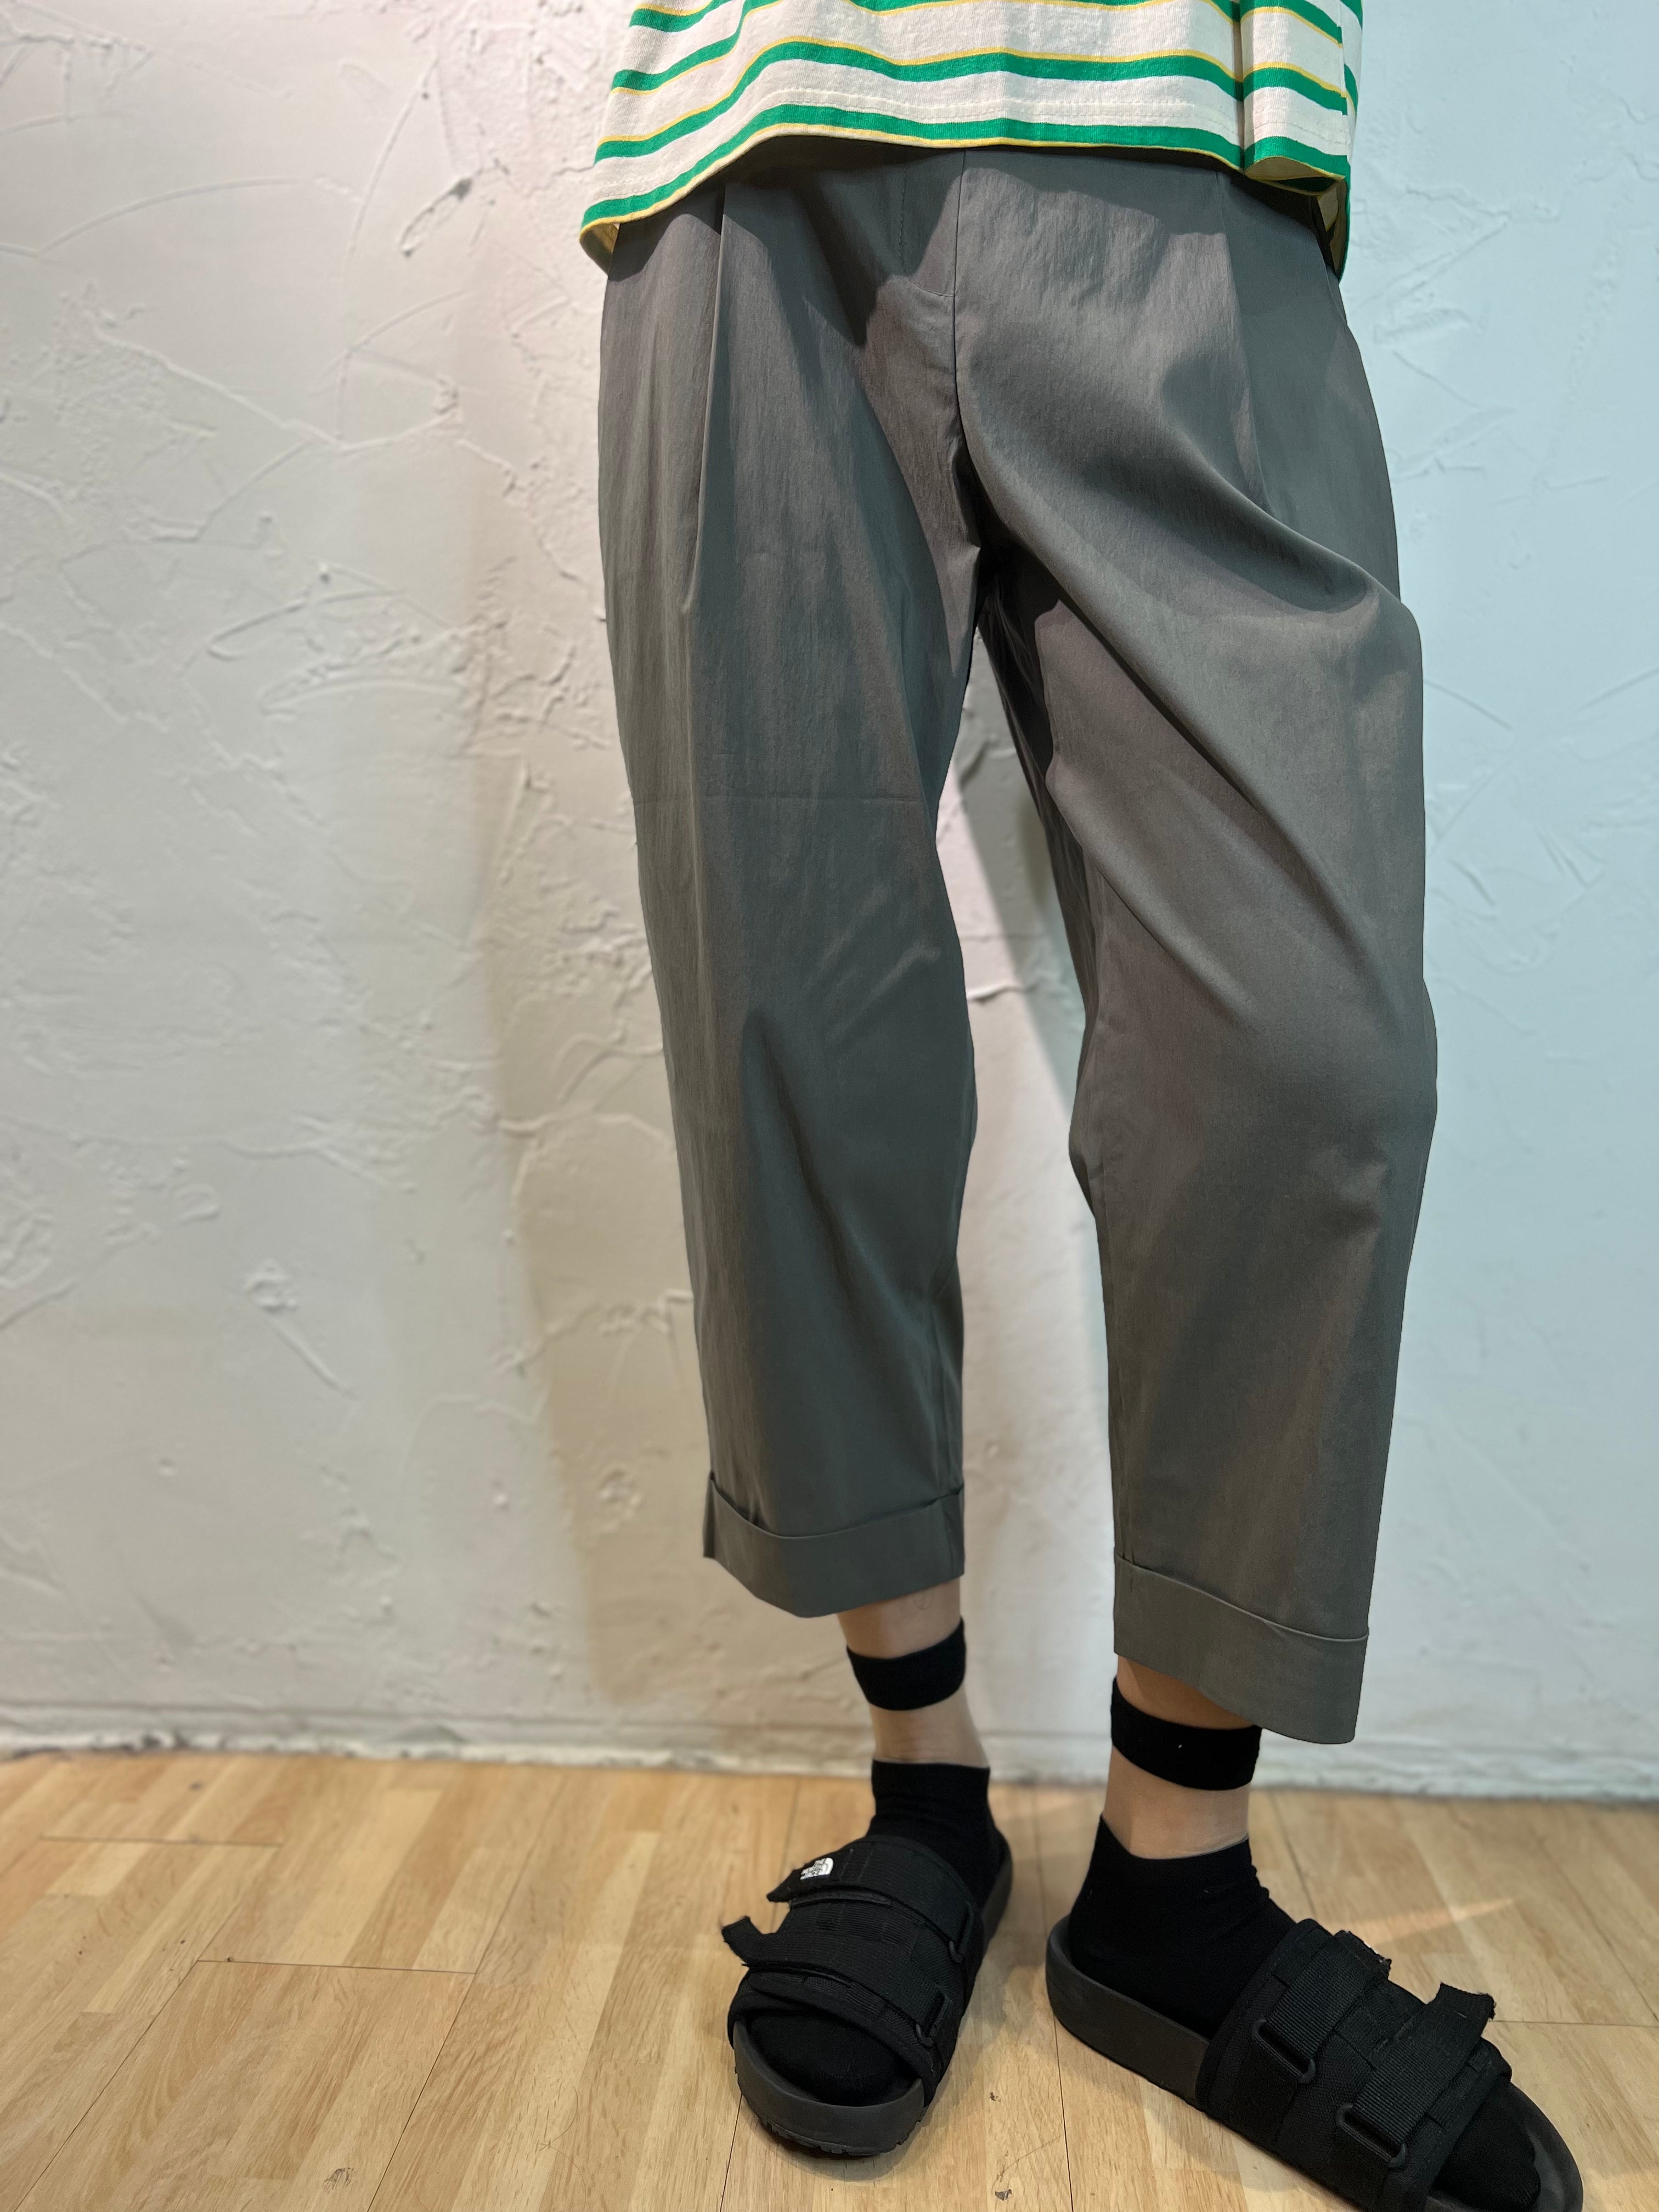 Flodded Hanging Legs Pants